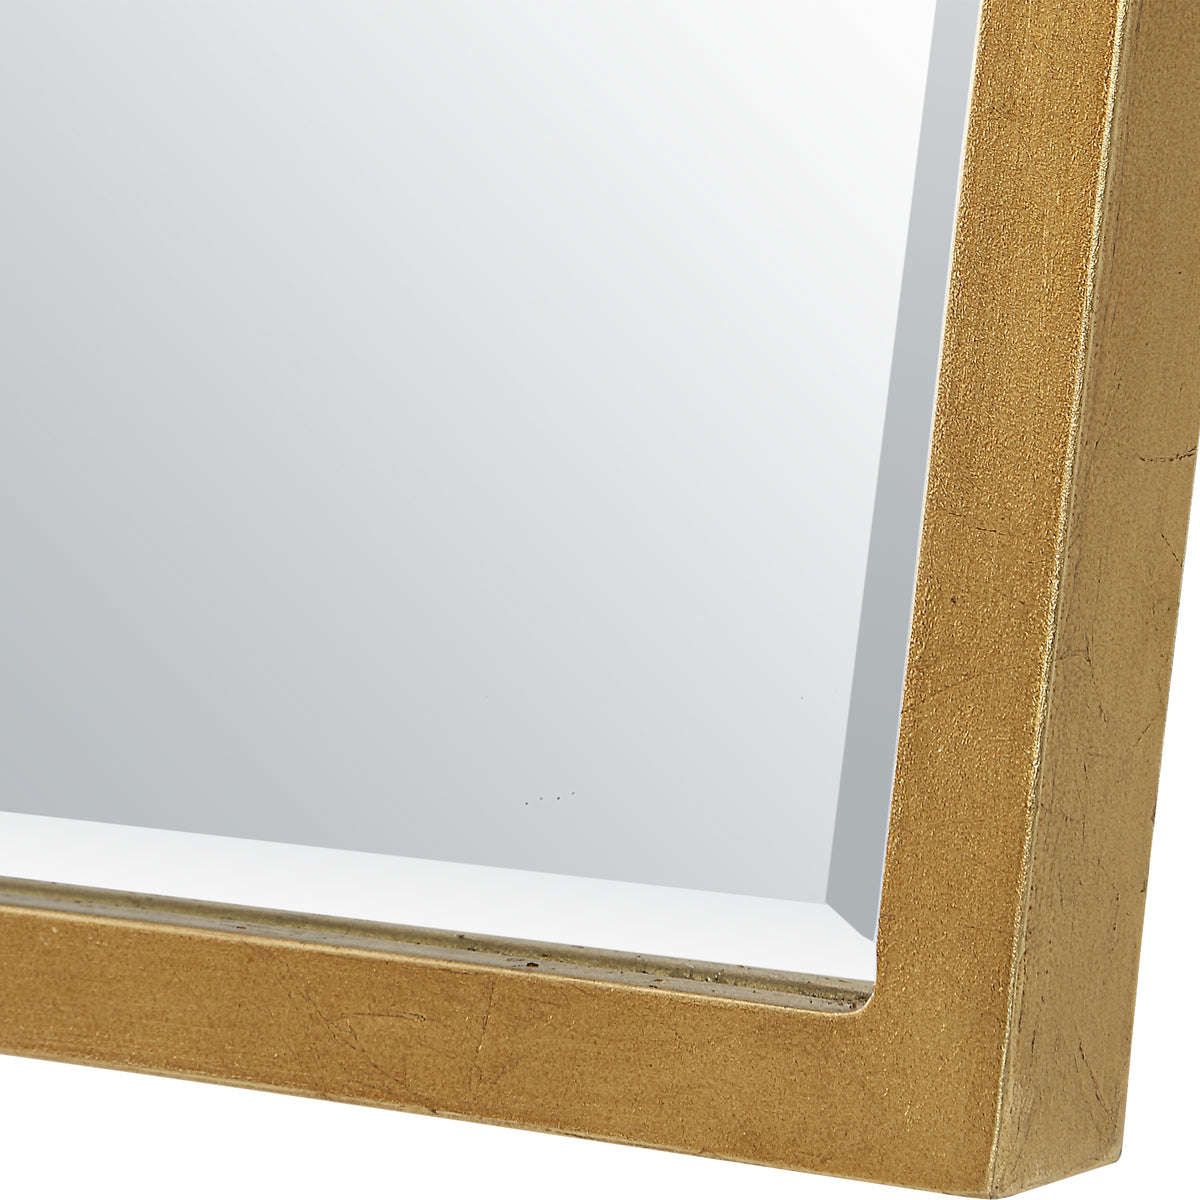 Uttermost Boundary Gold Arch Mirror